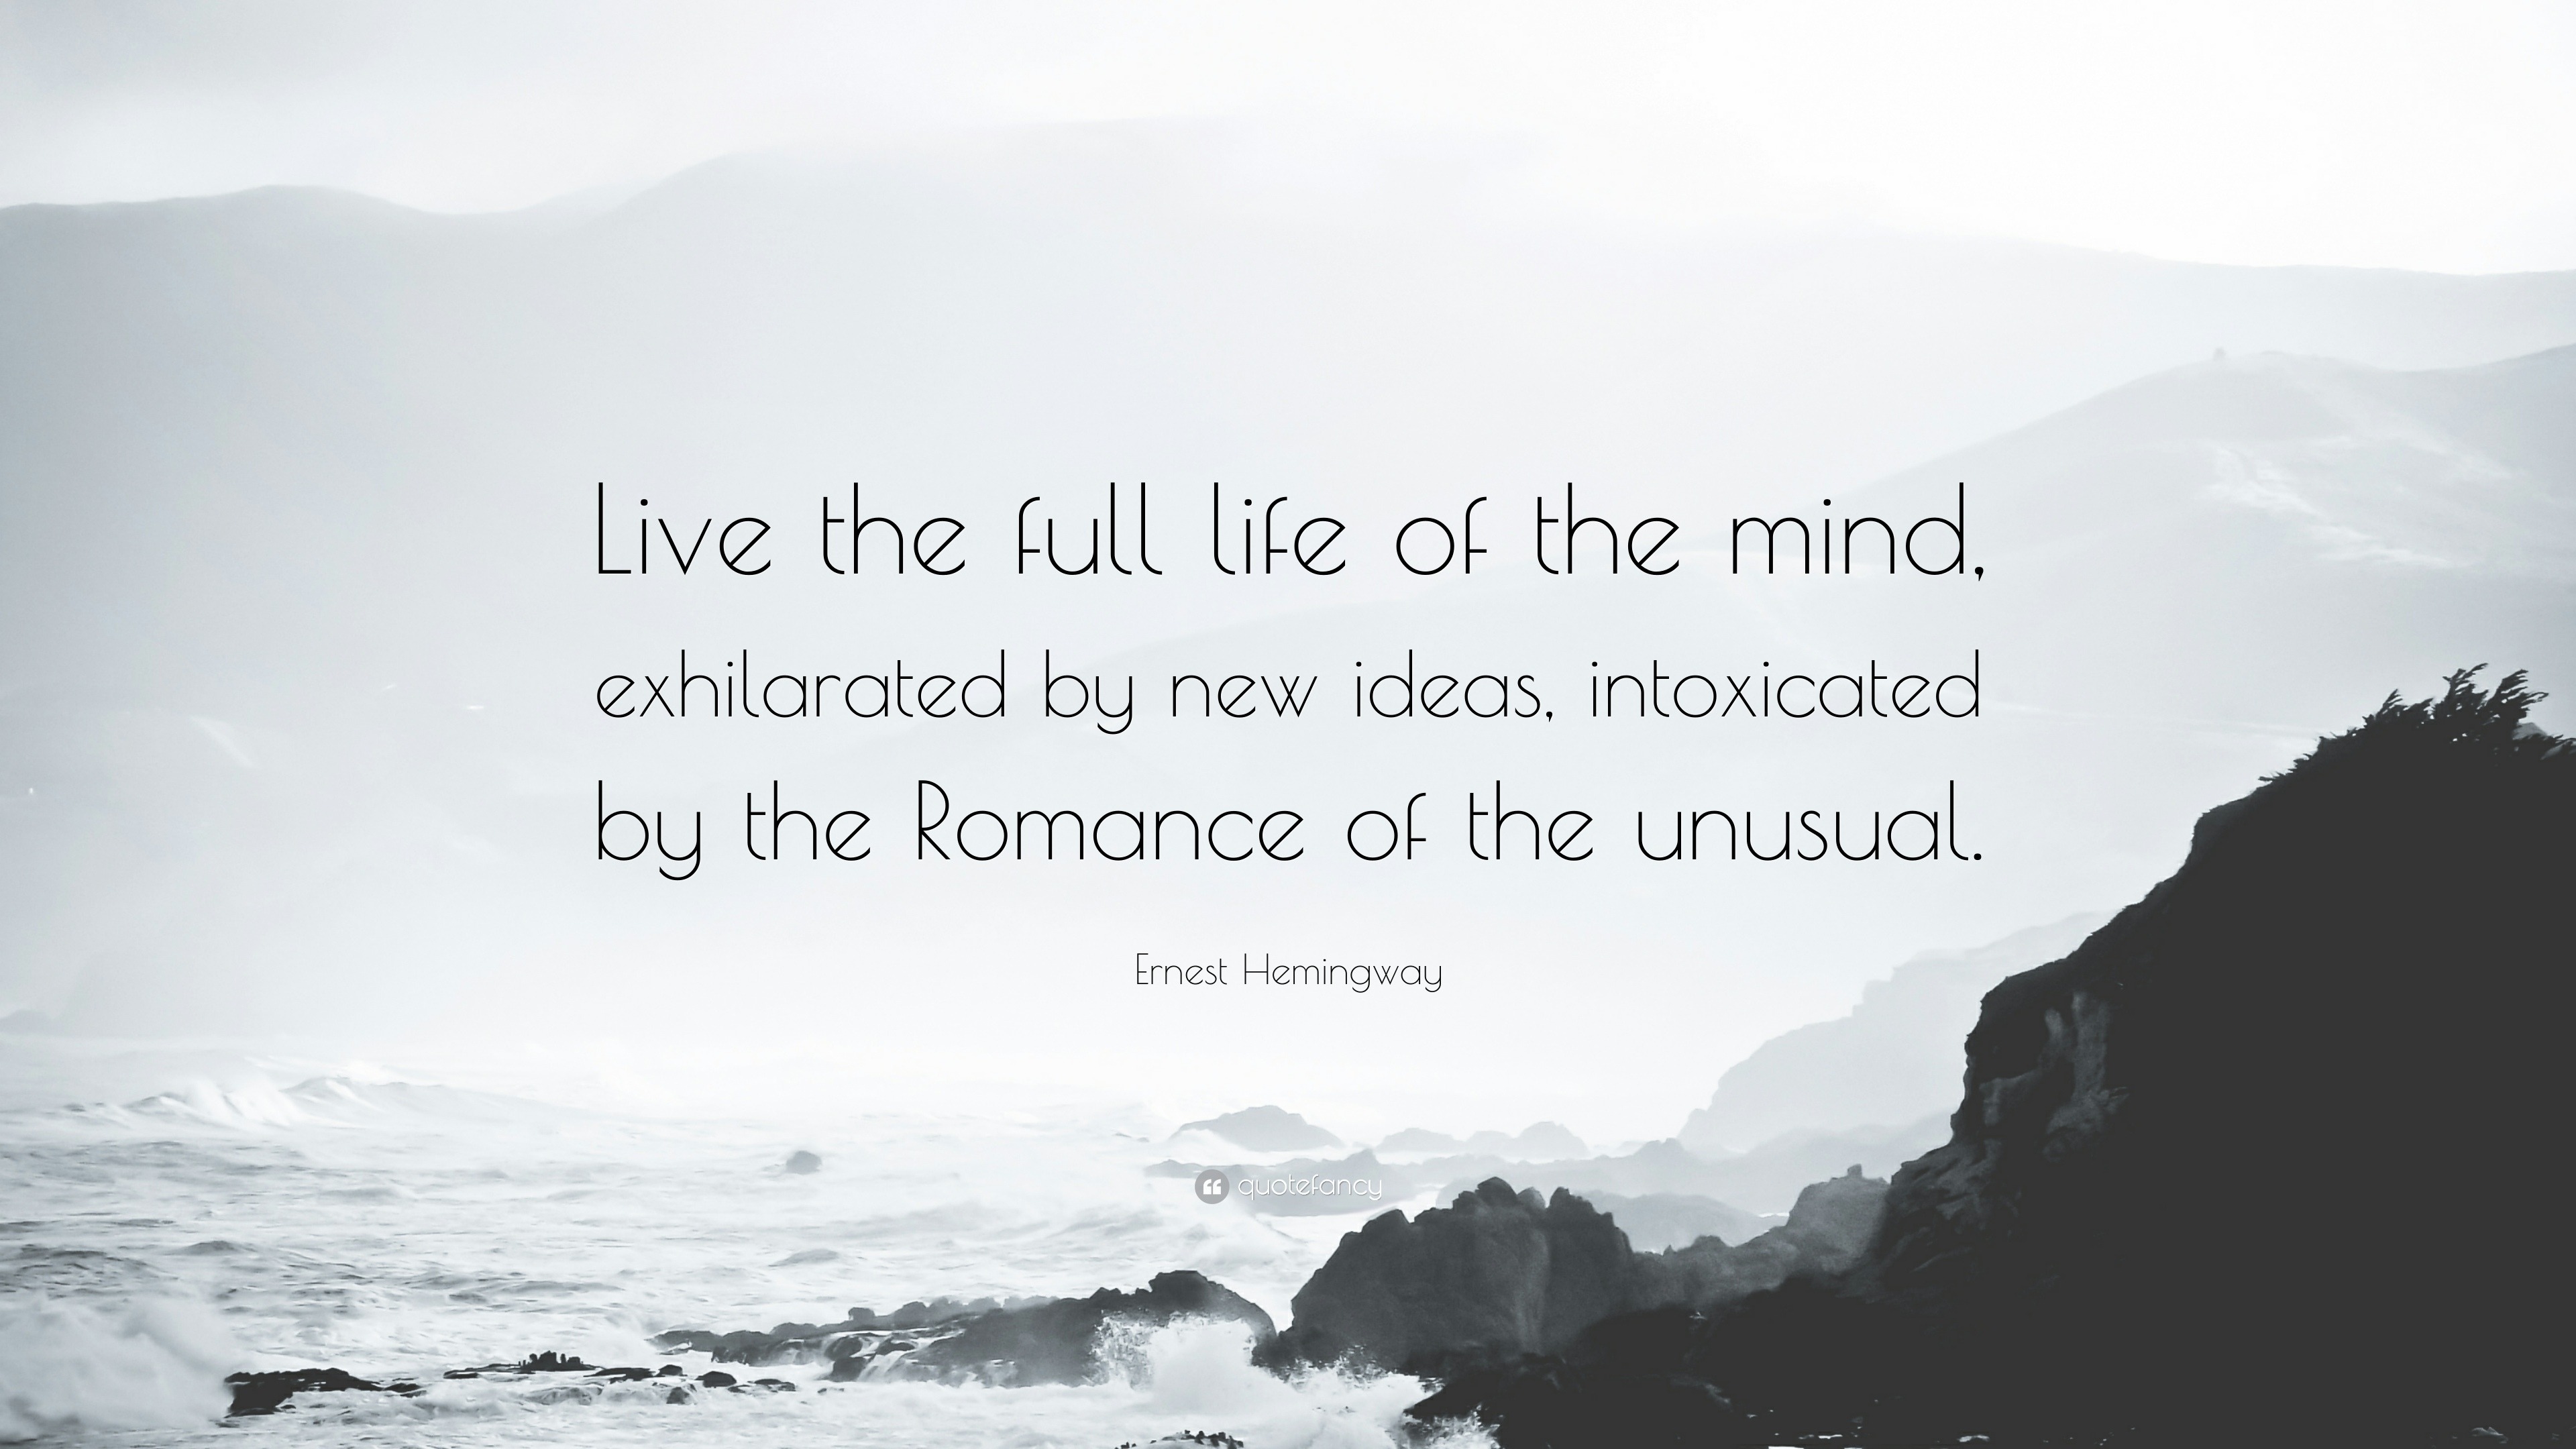 Ernest Hemingway Quote Live The Full Life Of The Mind Exhilarated By New Ideas Intoxicated By The Romance Of The Unusual 12 Wallpapers Quotefancy